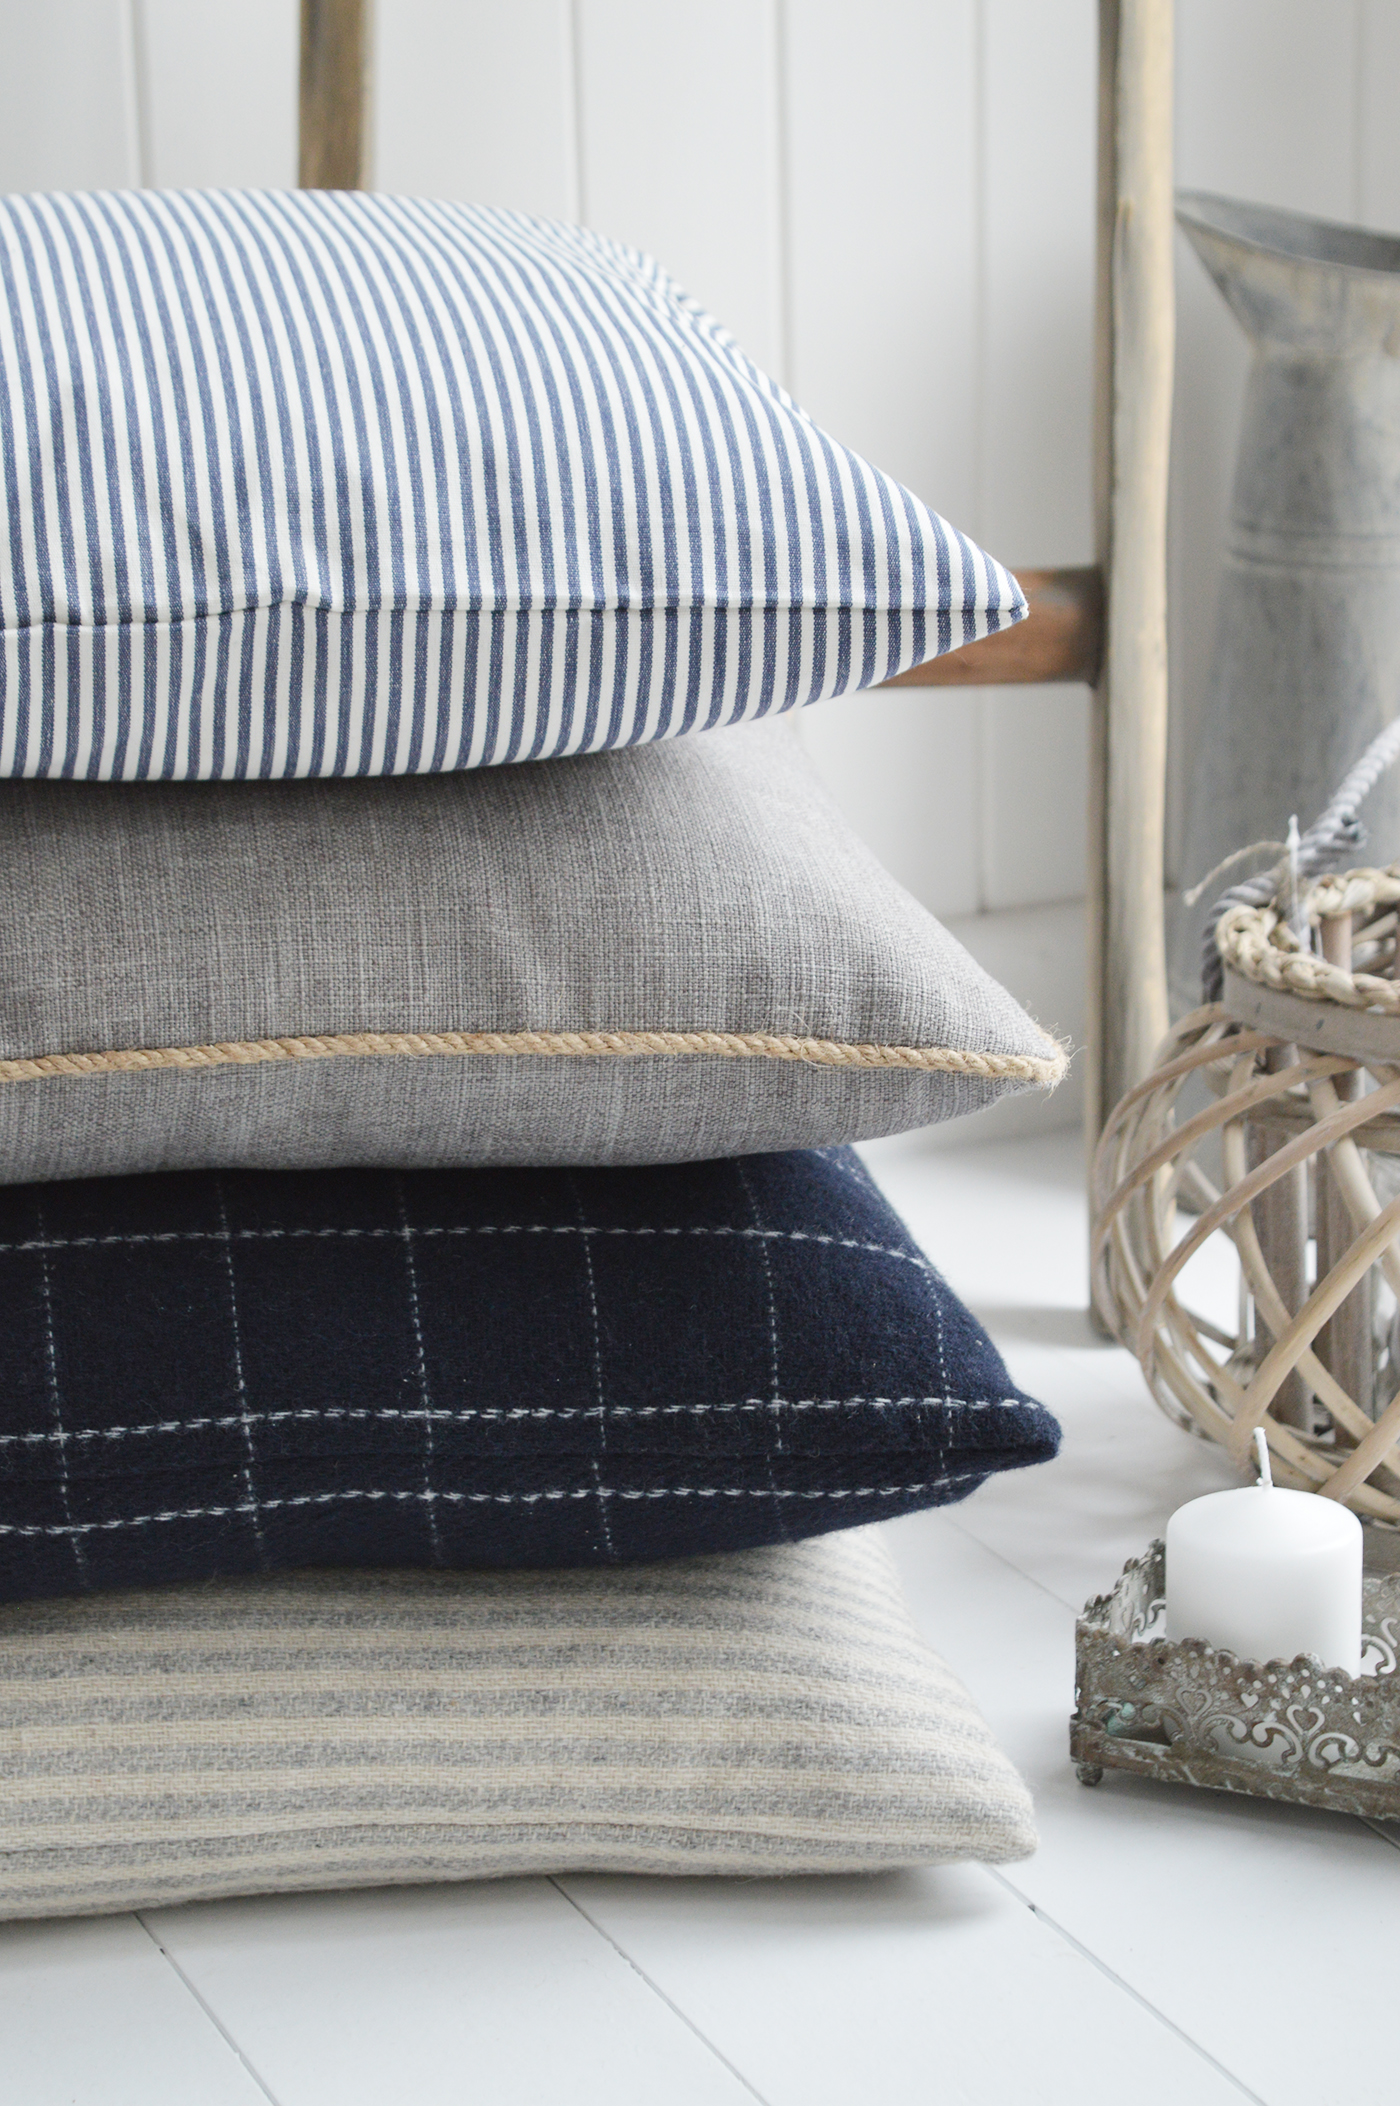 New England Style cushions and soft furnishings